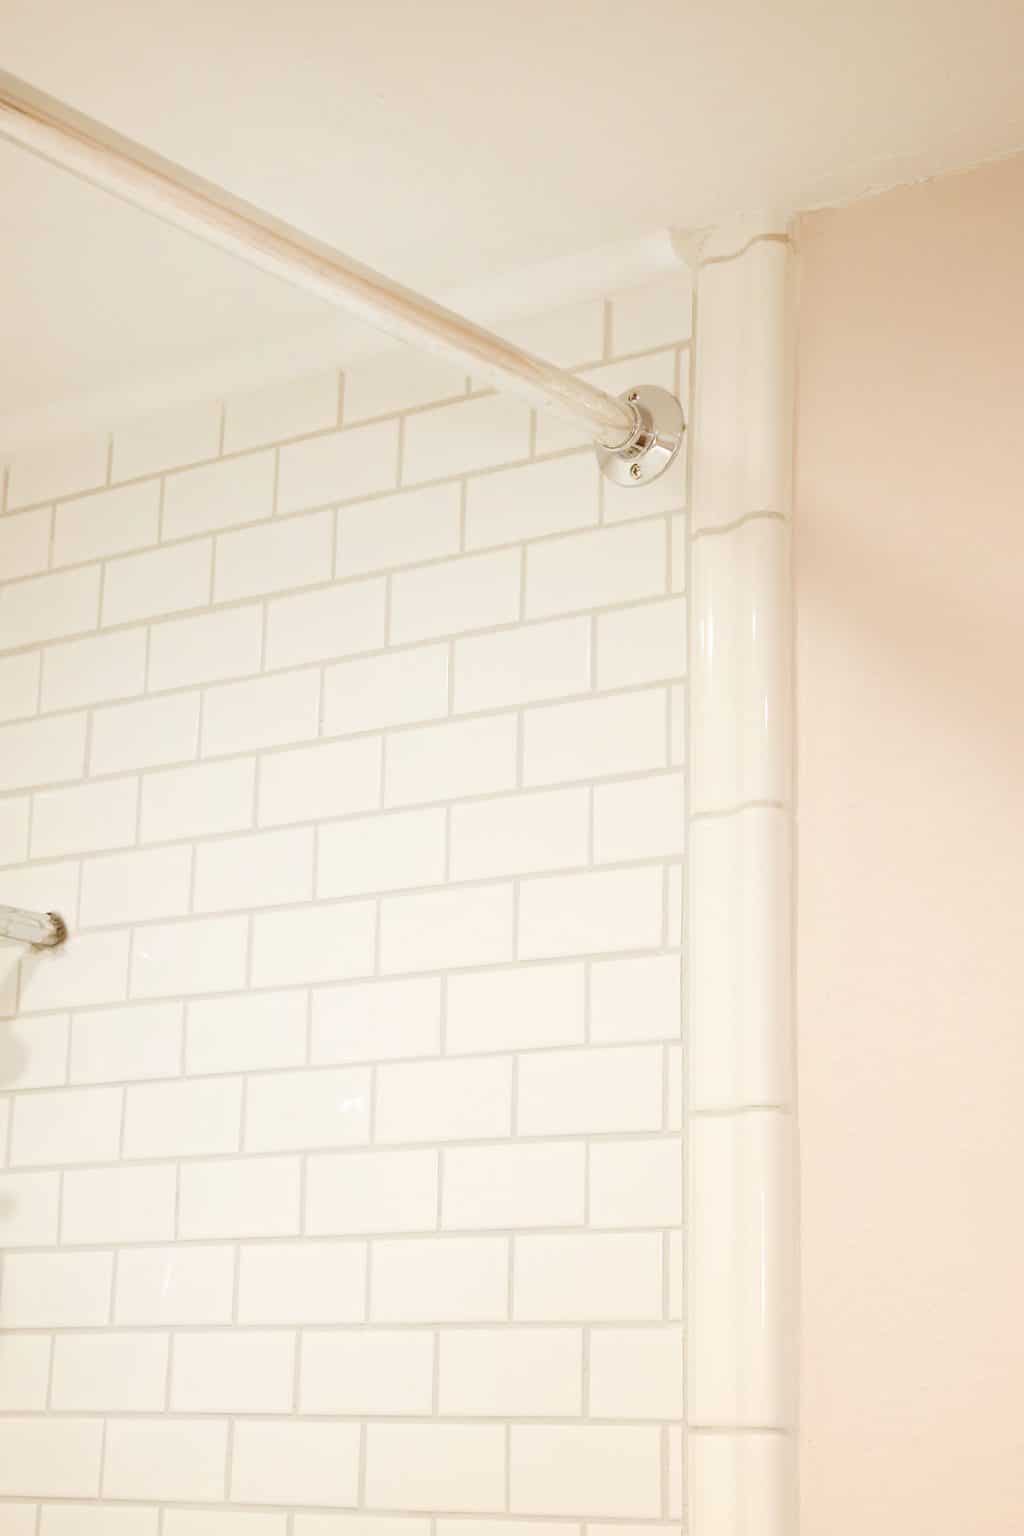 Tile To Hang A Shower Curtain, How To Install Curved Shower Curtain Rod On Tile